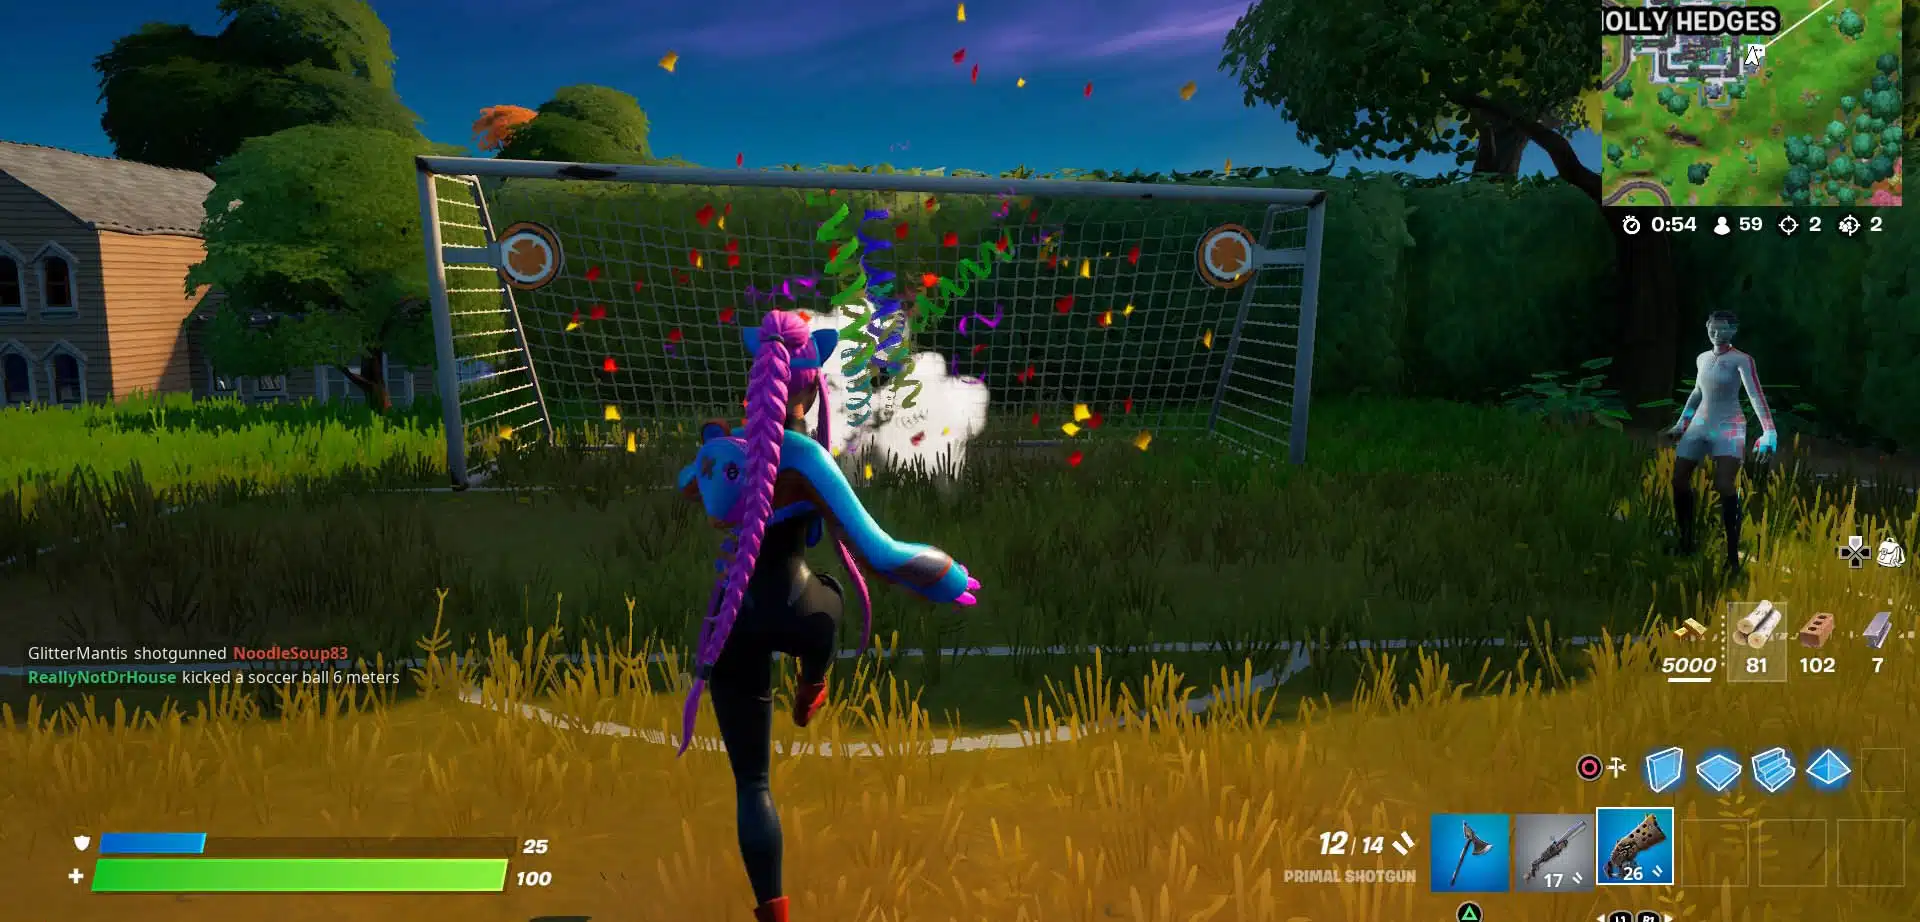 Score a goal with soccer toy in Fortnite